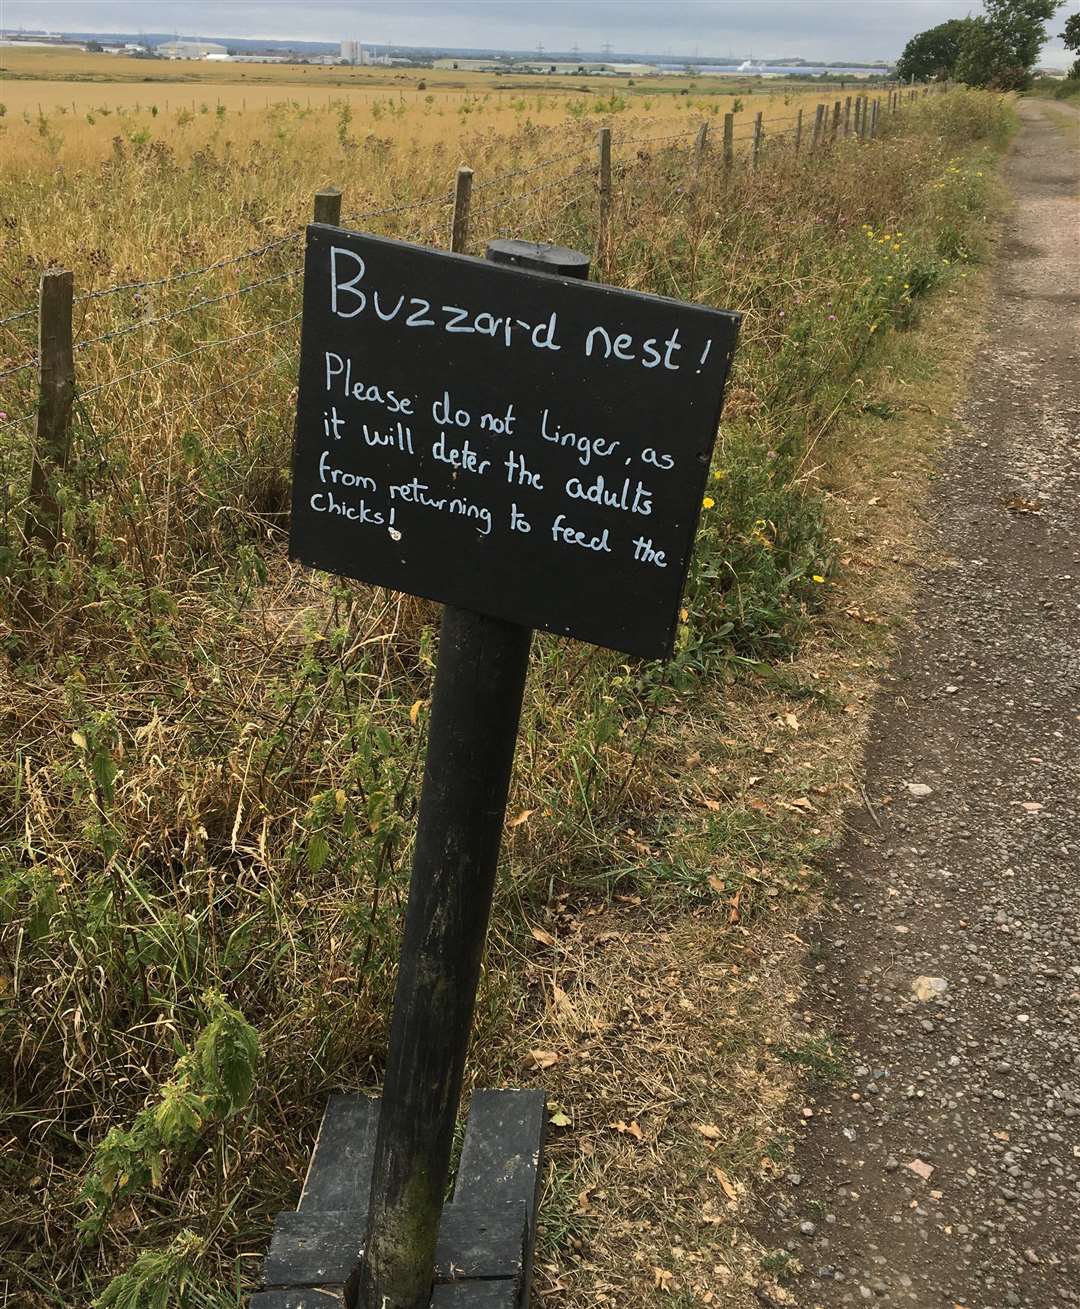 A sign showing buzzards have a nest